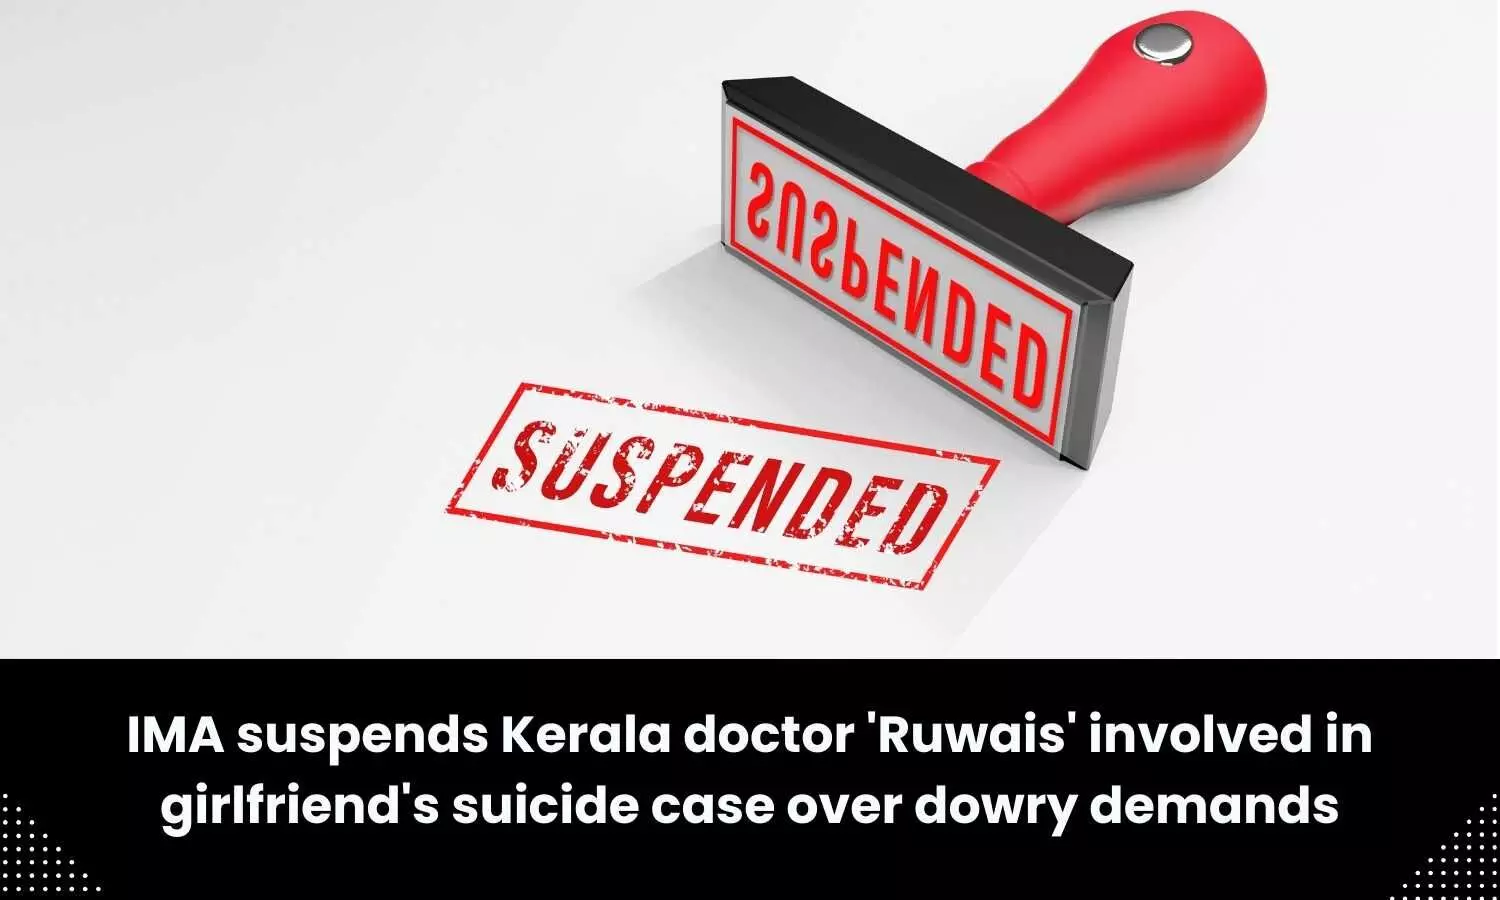 Kerala doctor involved in girlfriend suicide case over dowry demands suspended by IMA